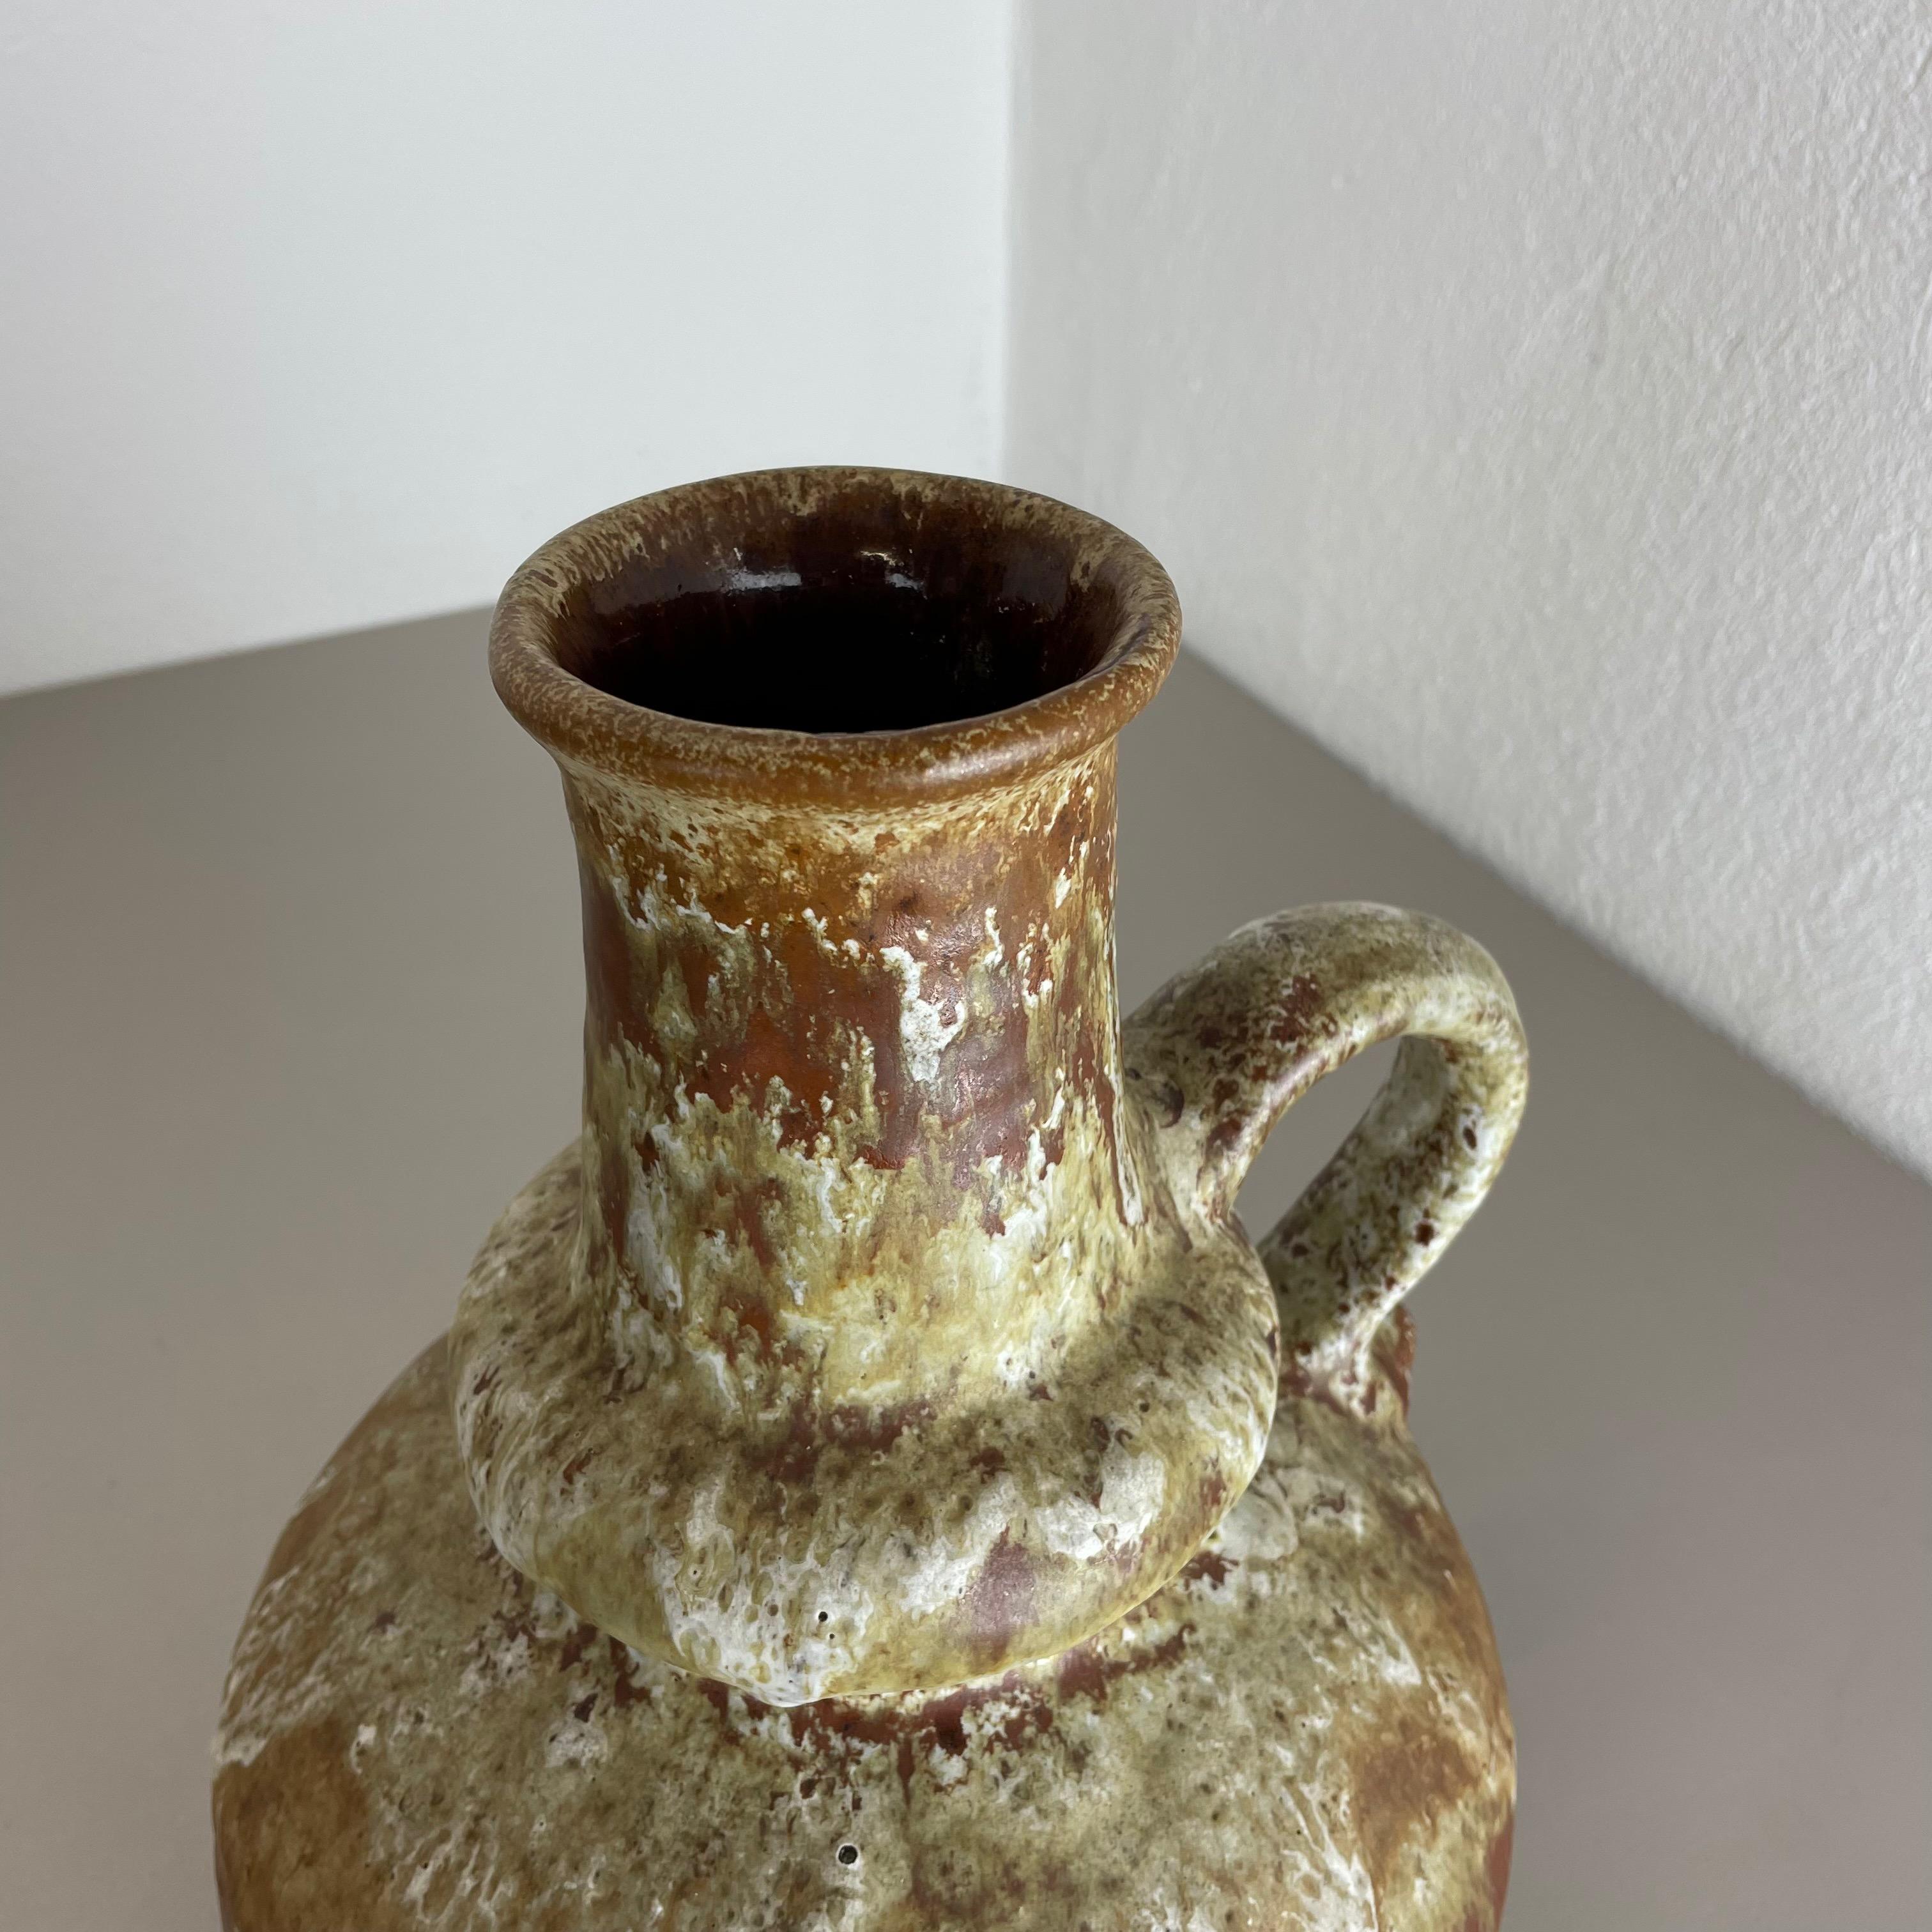 Brutalist WGP Pottery Fat Lava Multi-Color Vase Object by Ruscha, Germany, 1970s For Sale 6